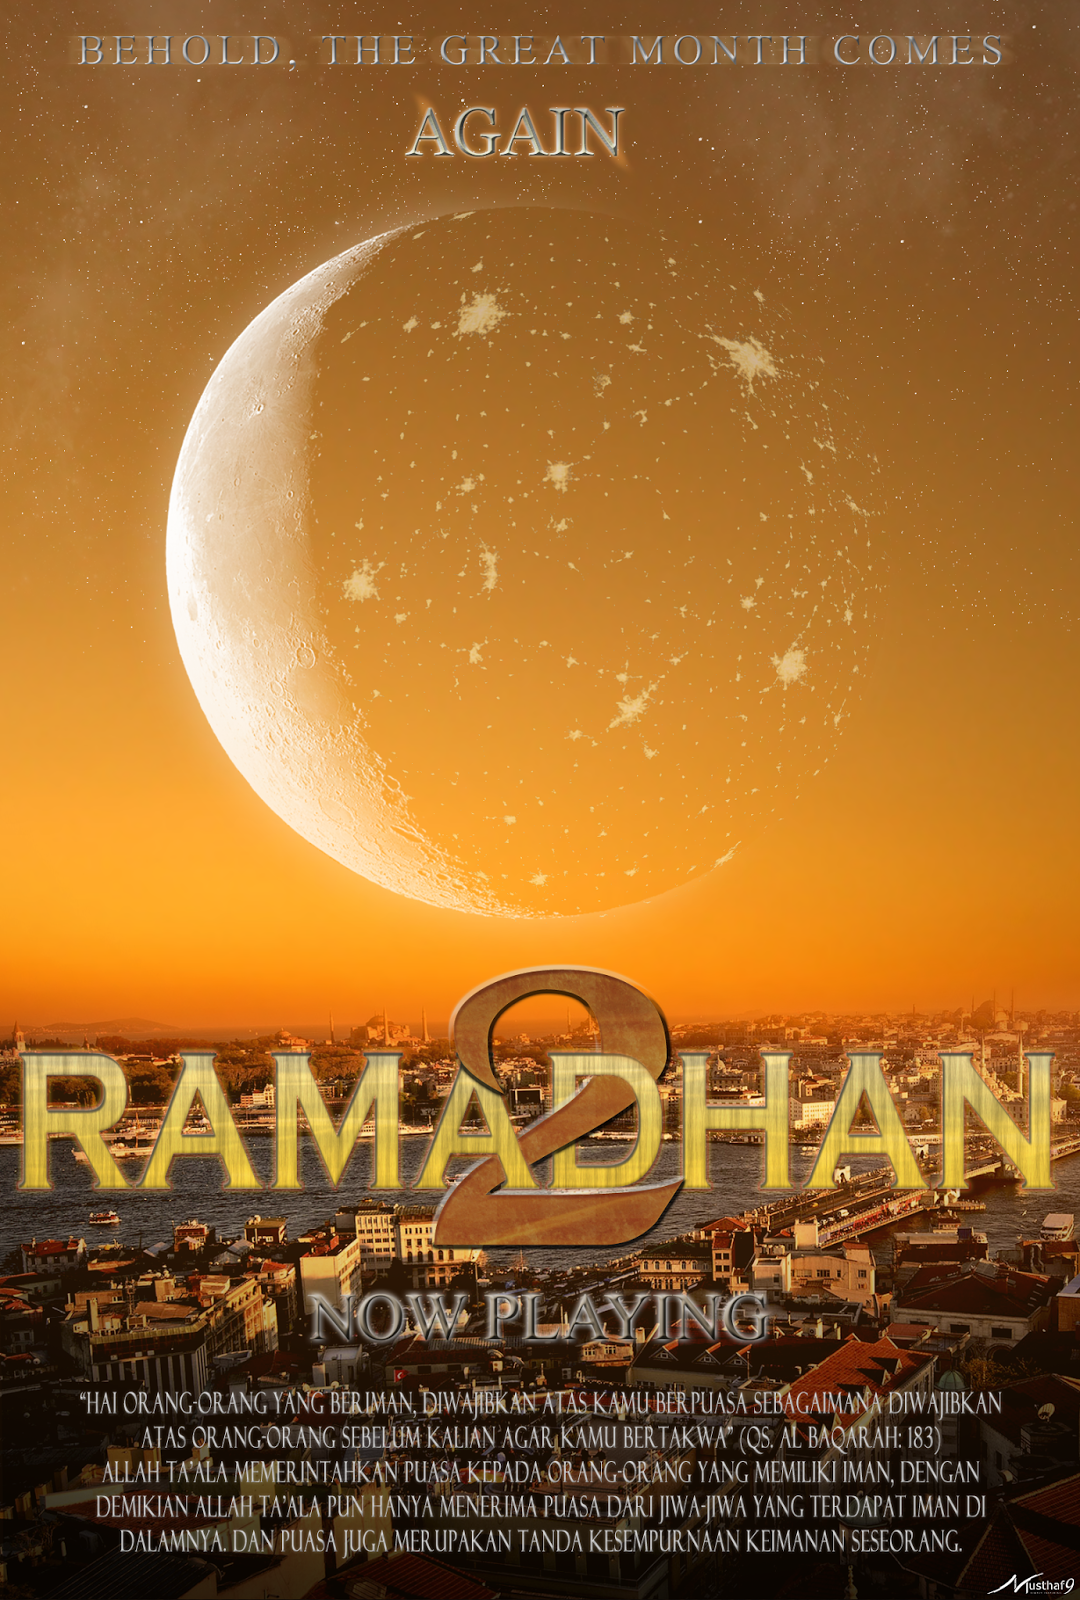 The Must: Now Playing: Ramadhan